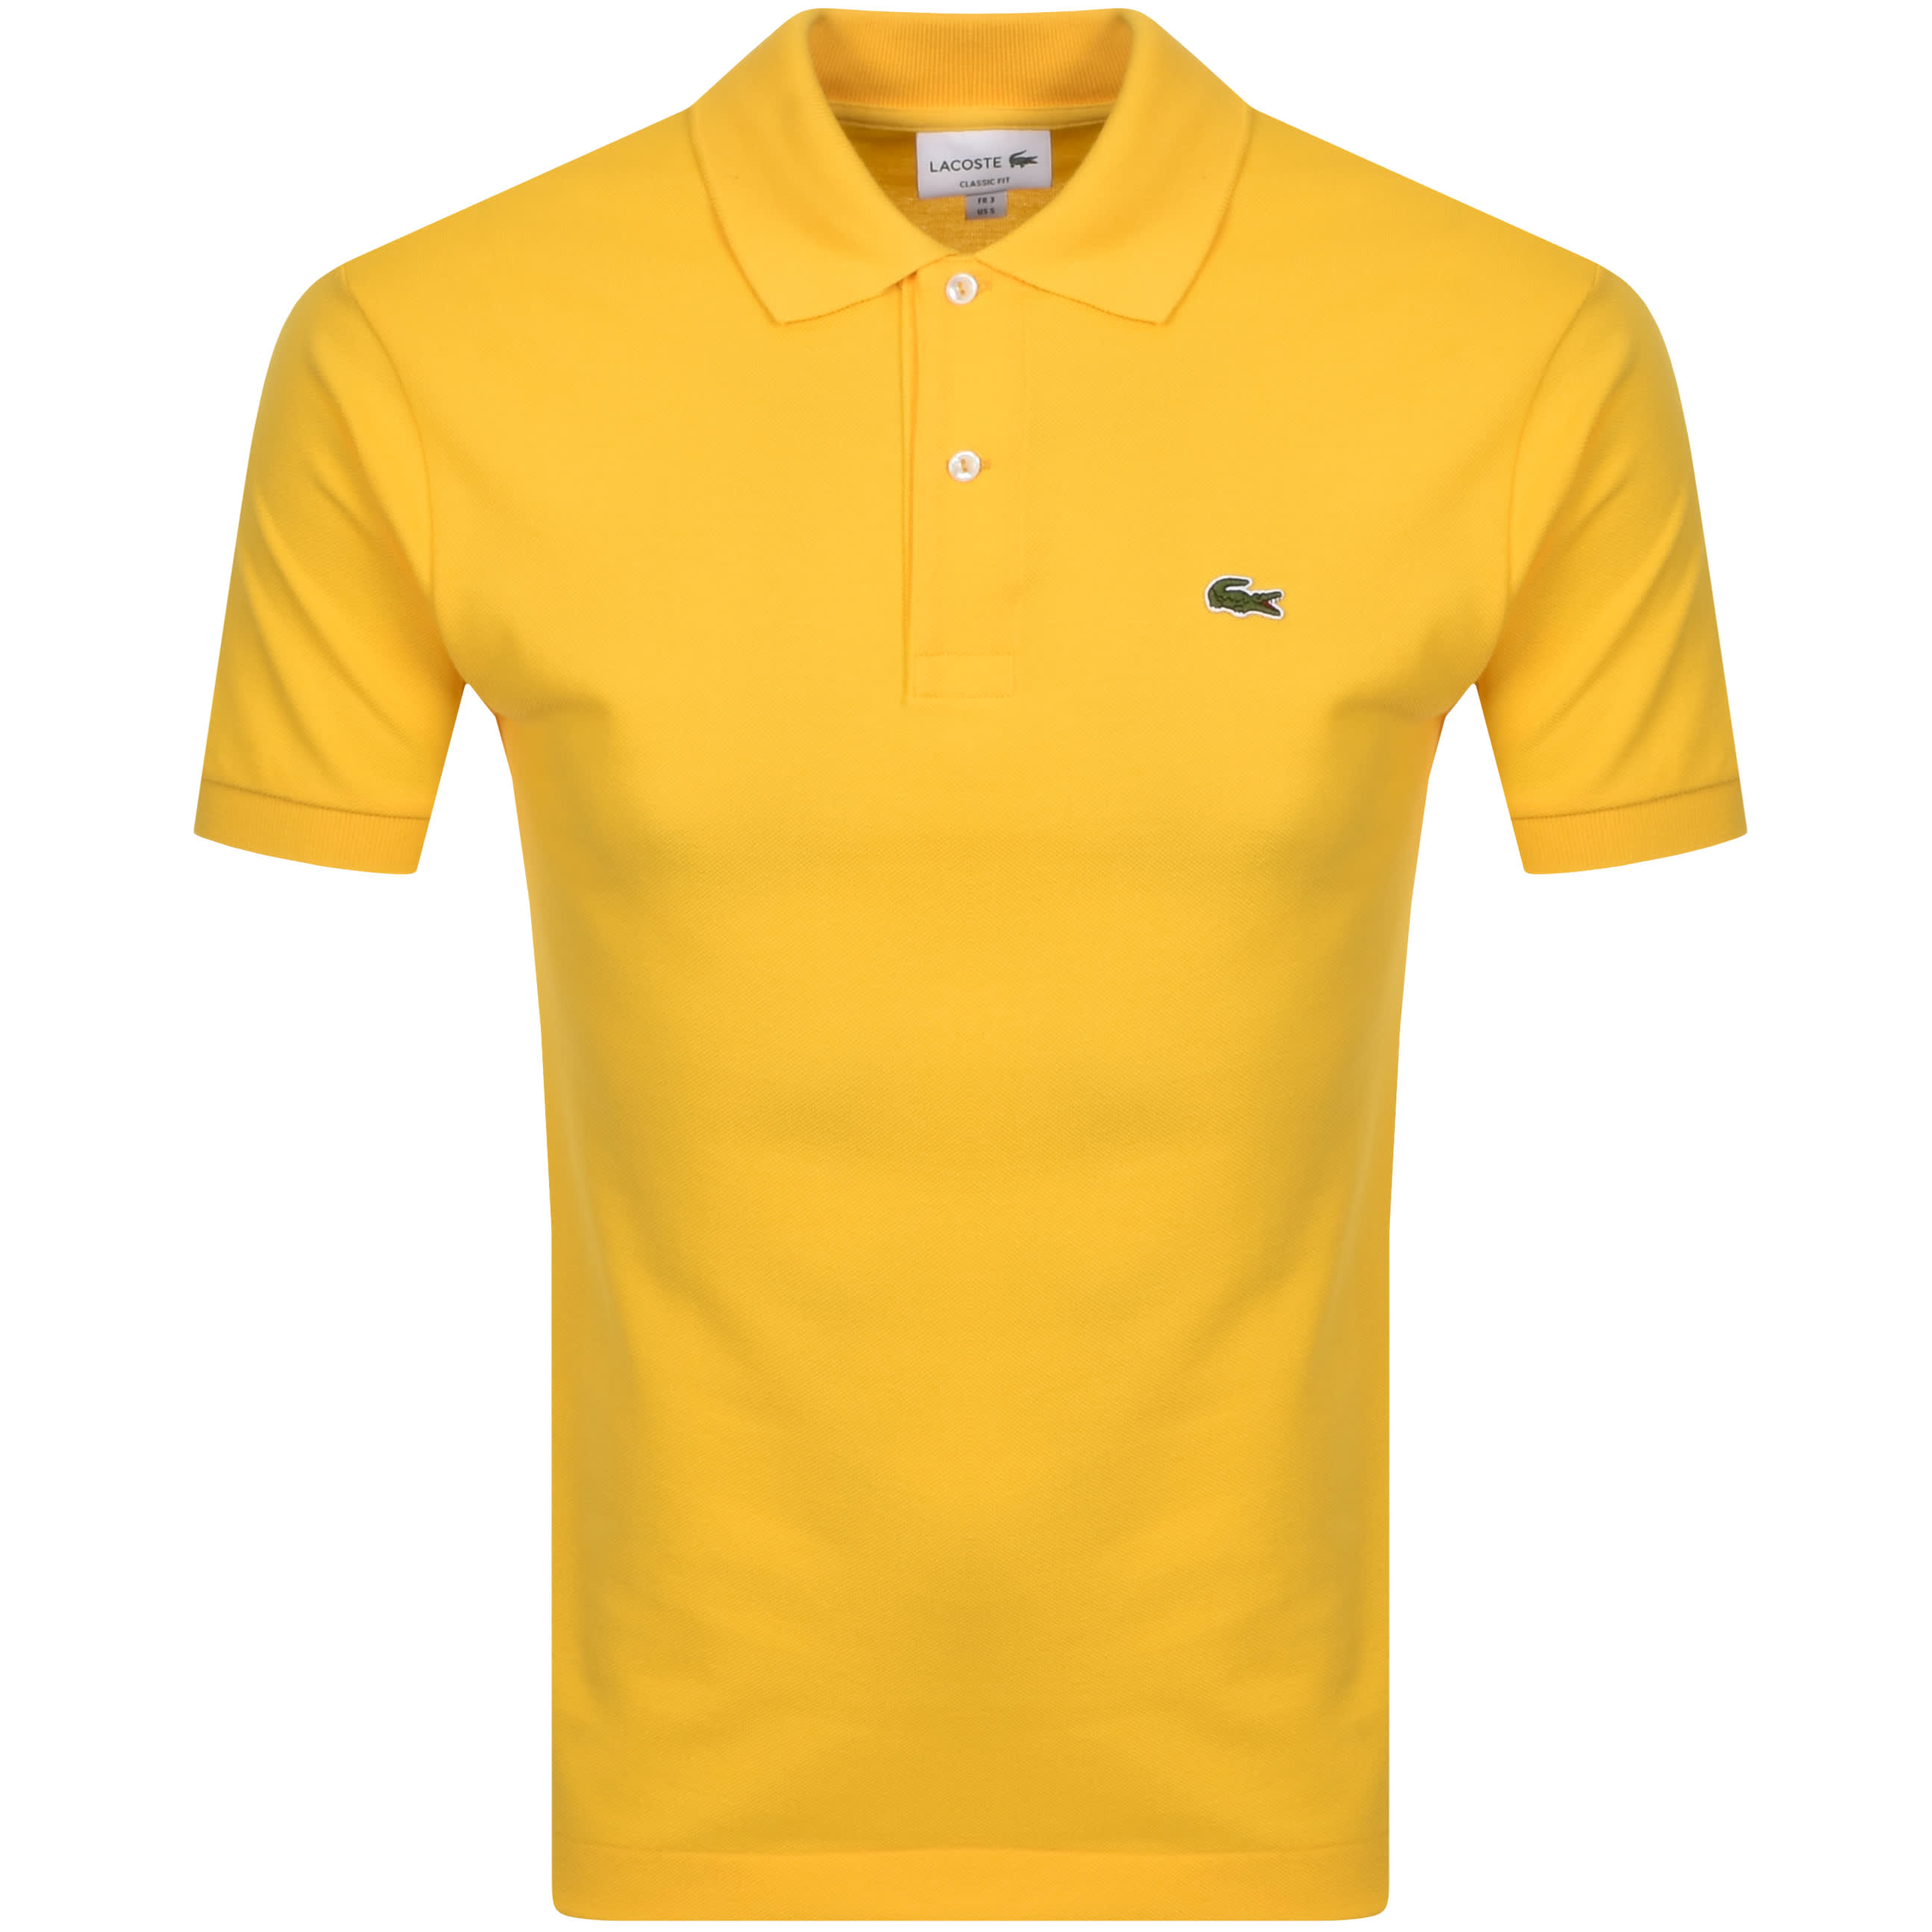 Lacoste Short Sleeved Polo T Shirt 